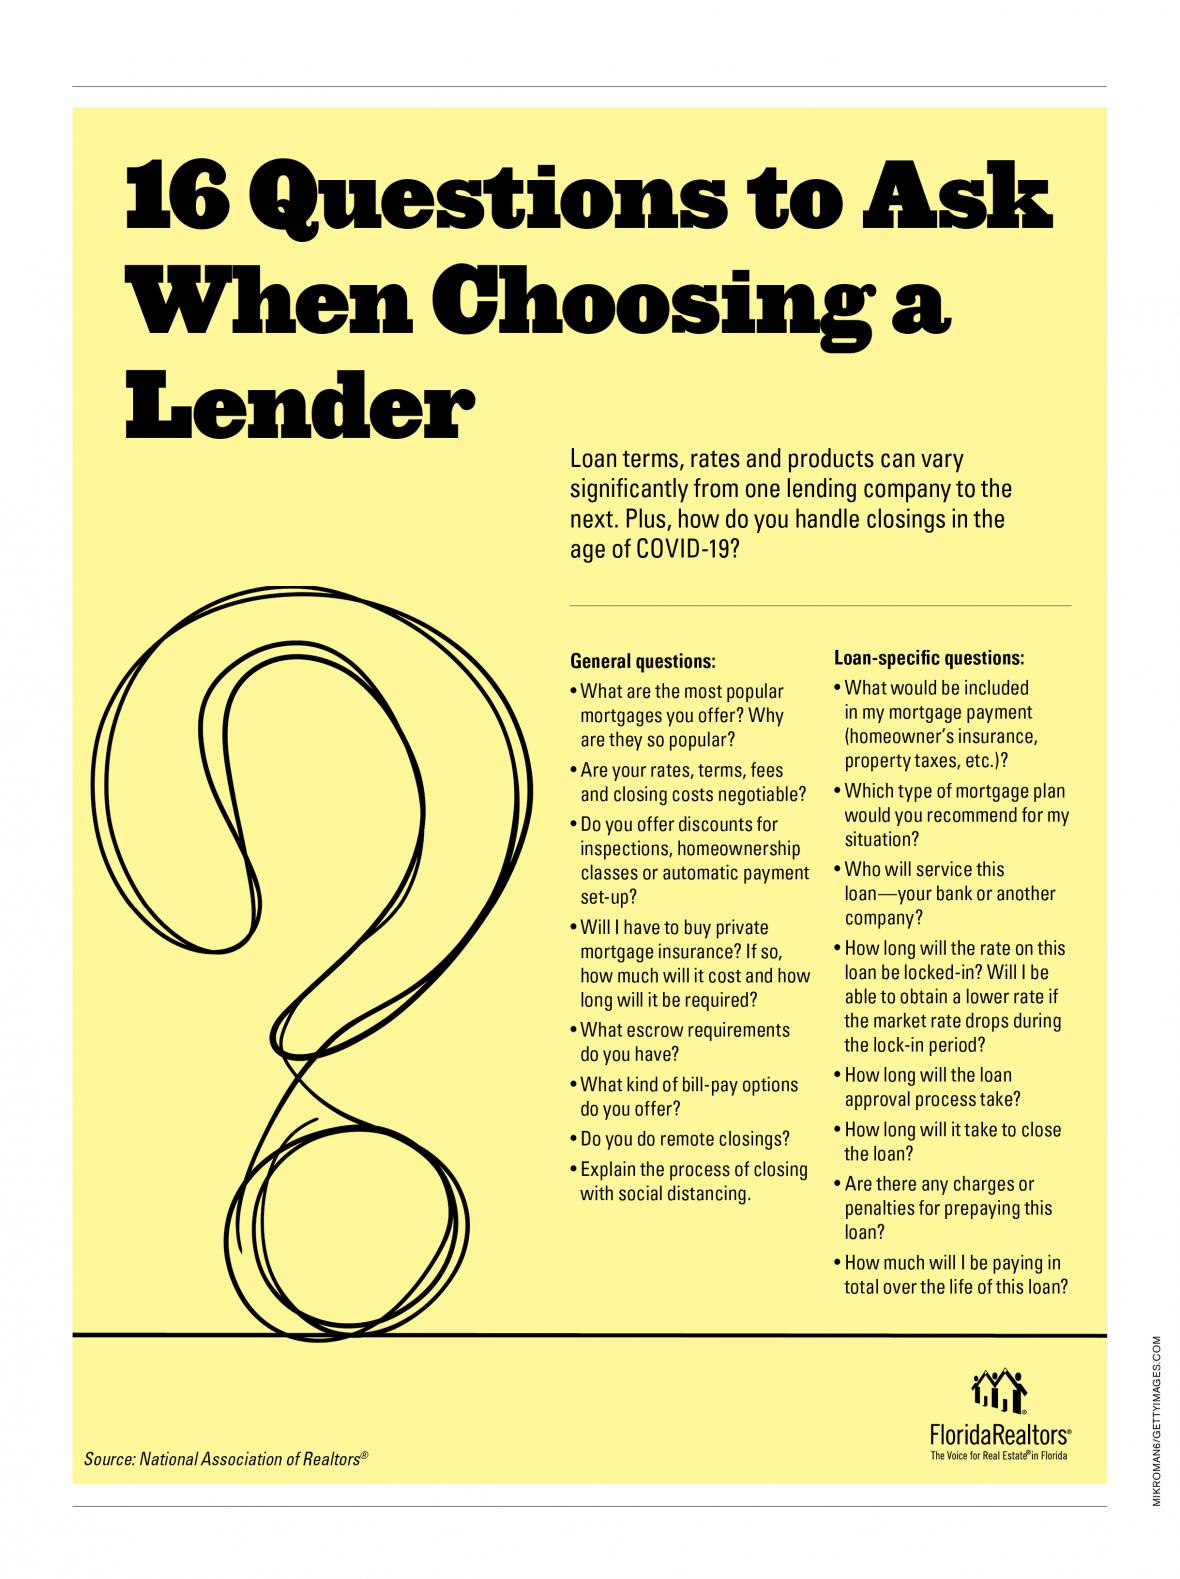 16 Questions to Ask When Choosing a Lender infographic